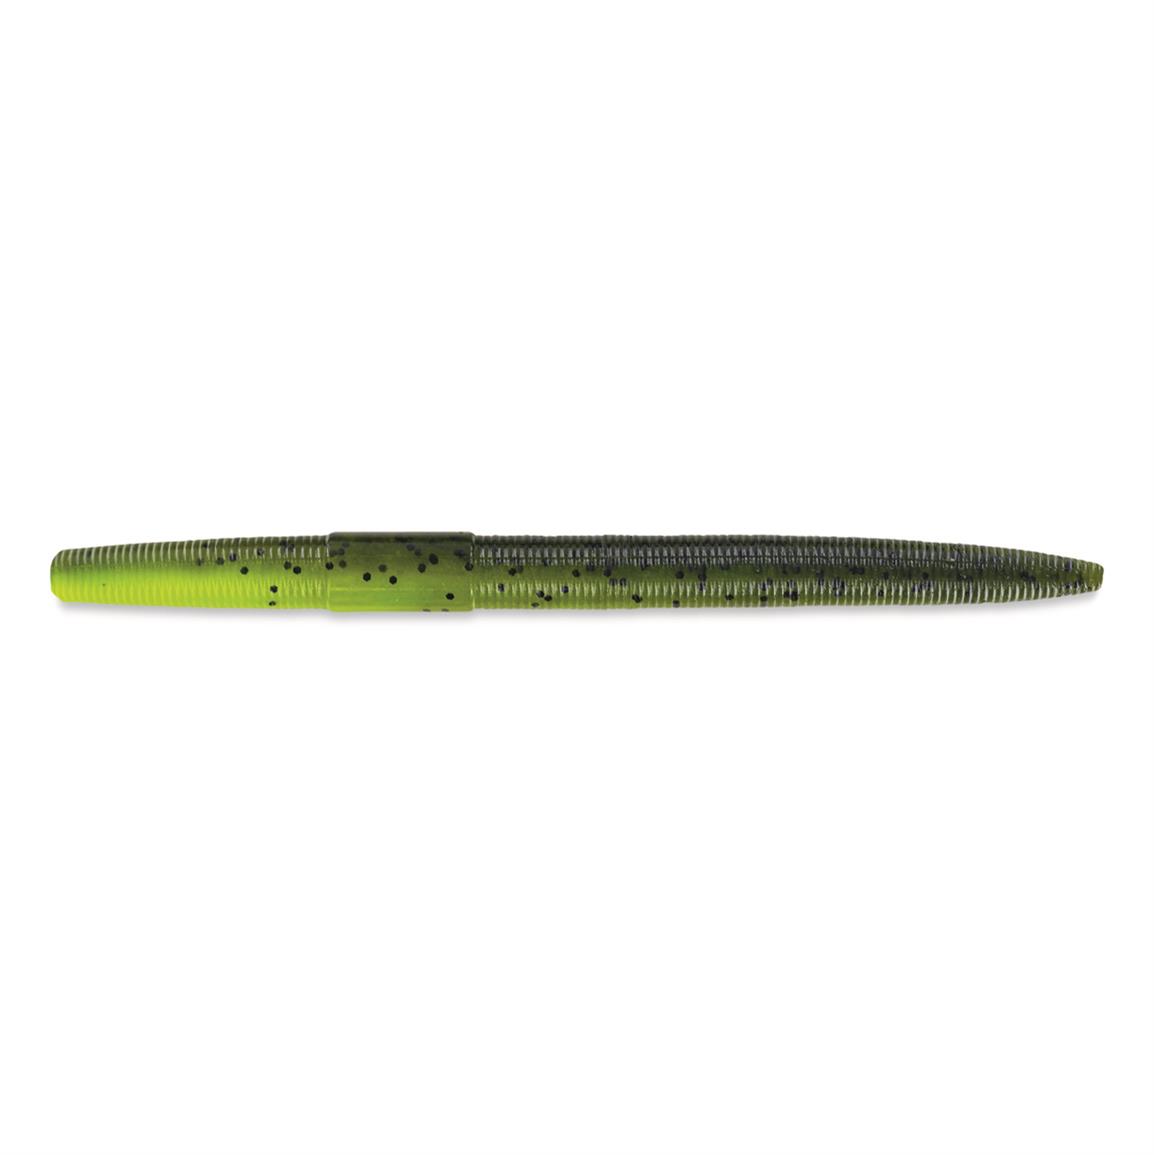 Big Bite Baits 4 Painted Slim Minnow Lure, 6 pack - 734422, Soft Baits at Sportsman's  Guide